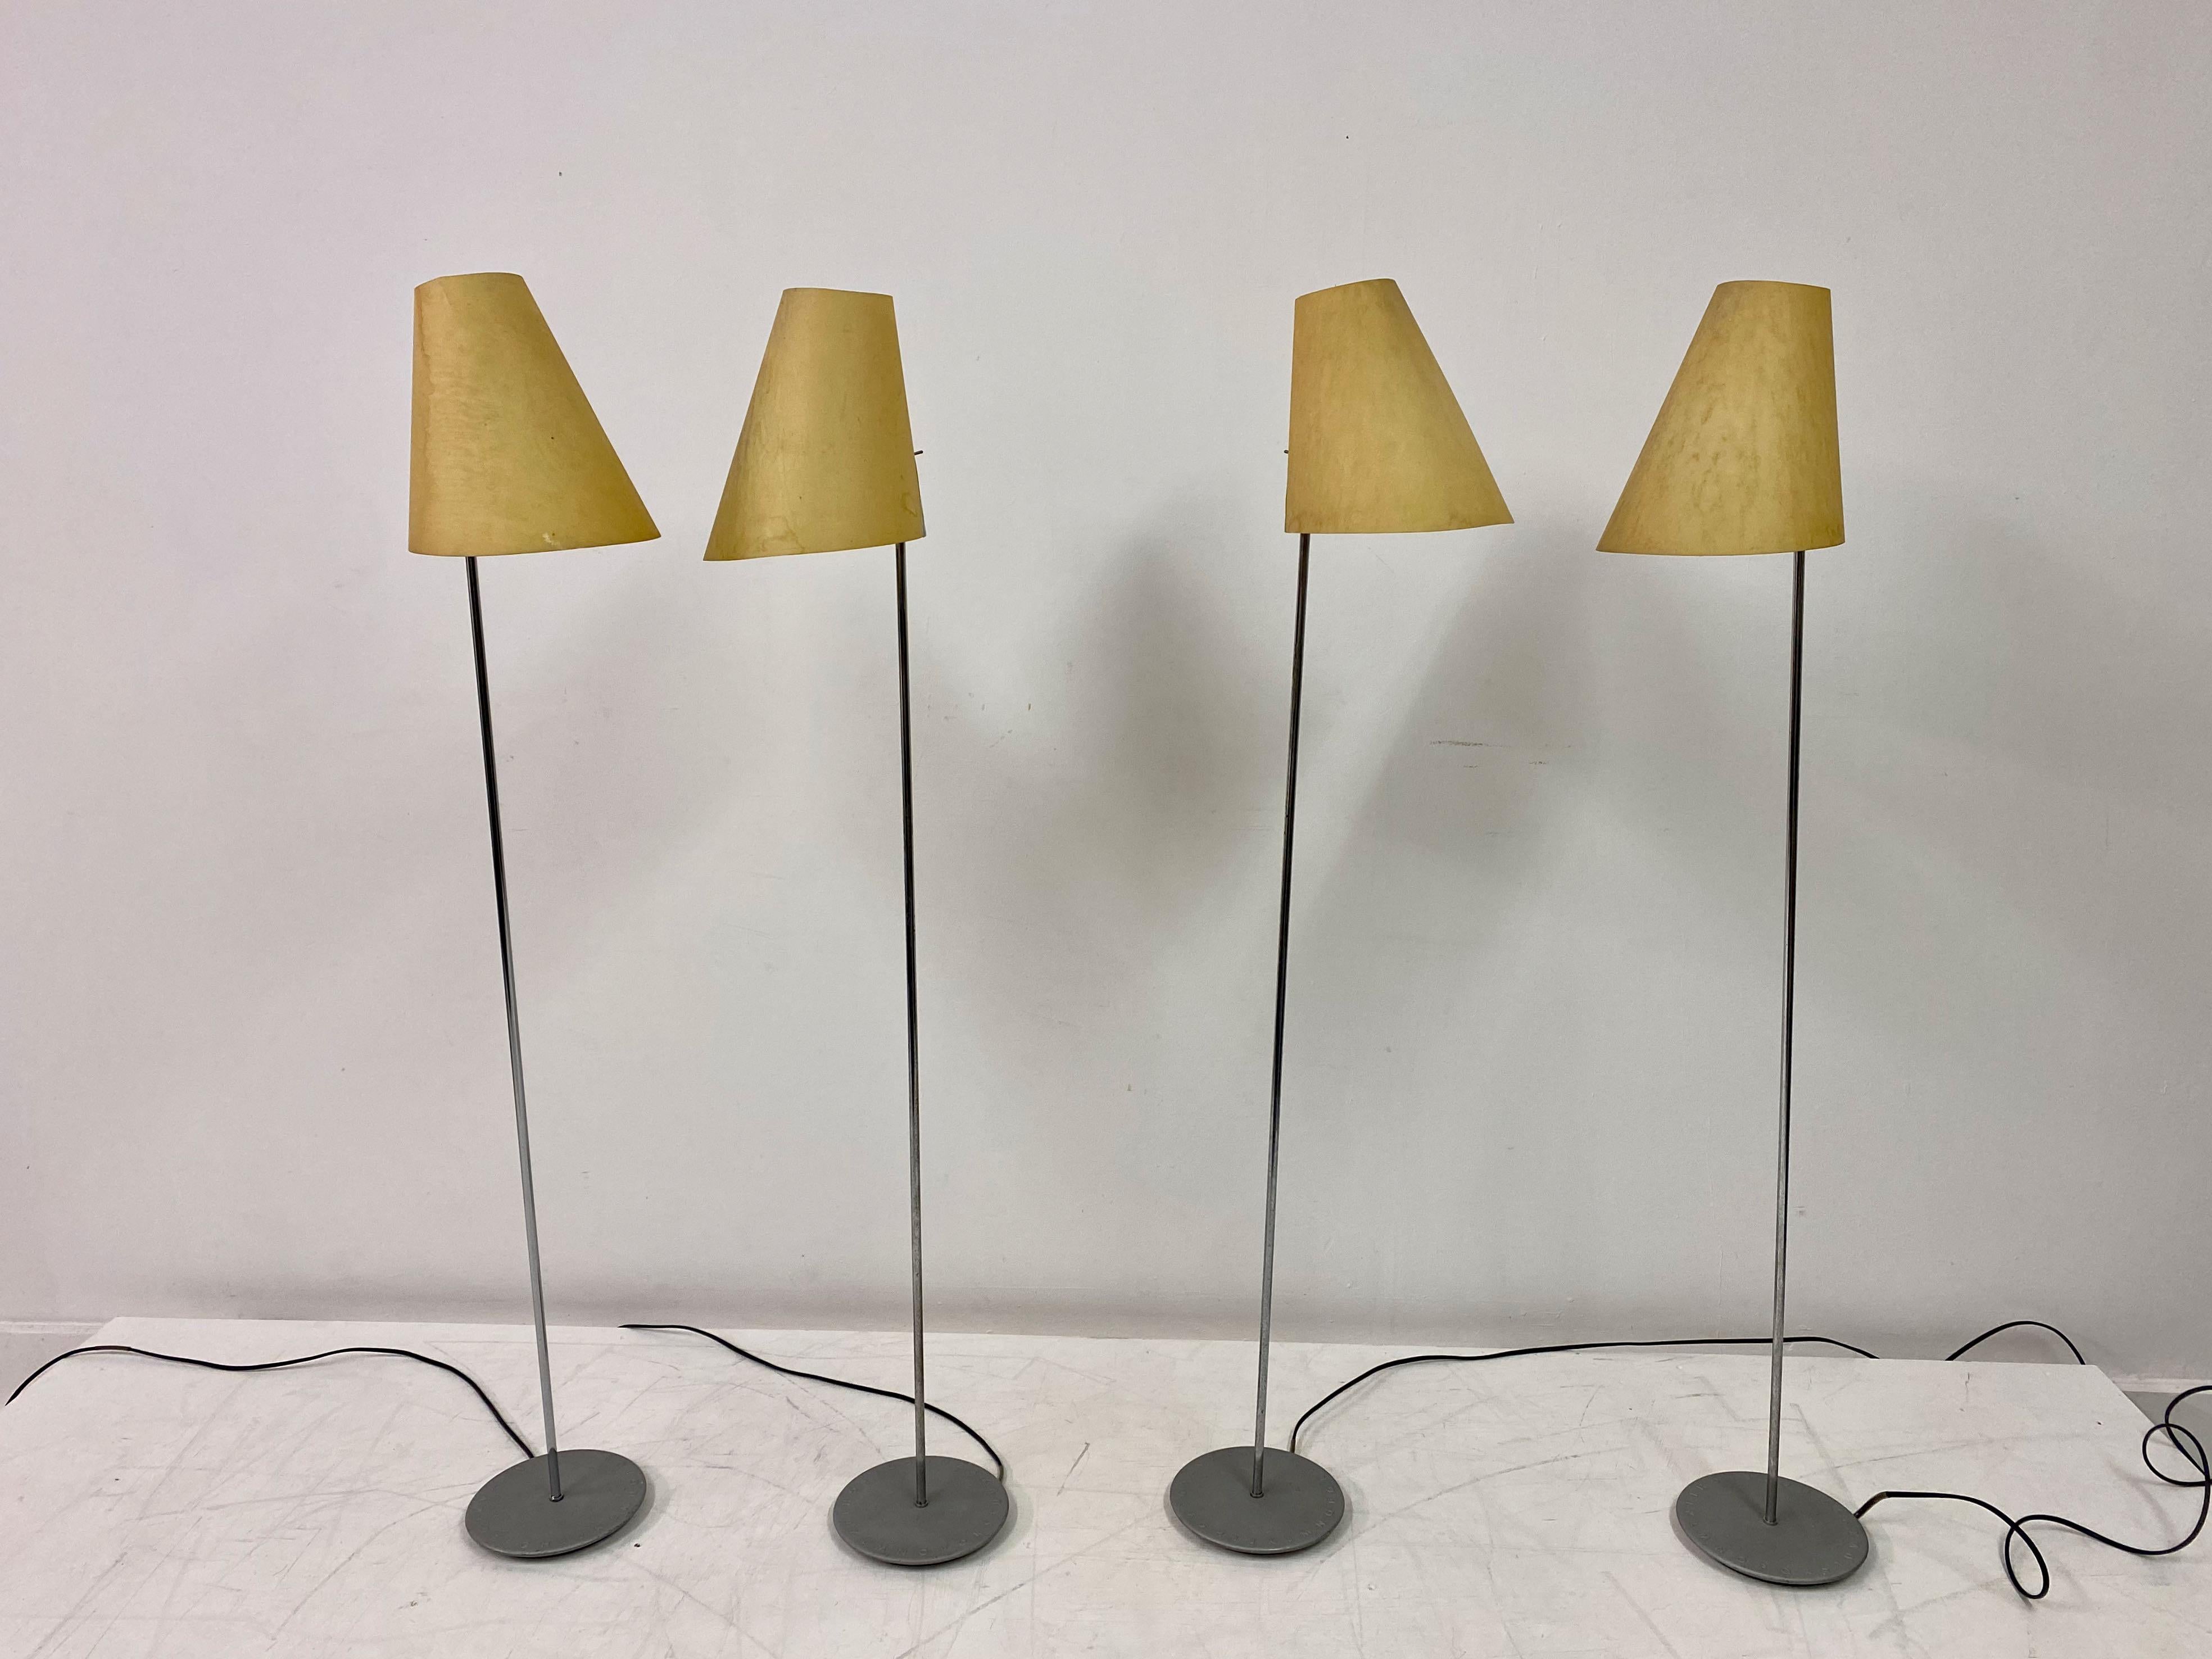 Set of Four Italian Mid Size Floor Lamps In Good Condition For Sale In London, London